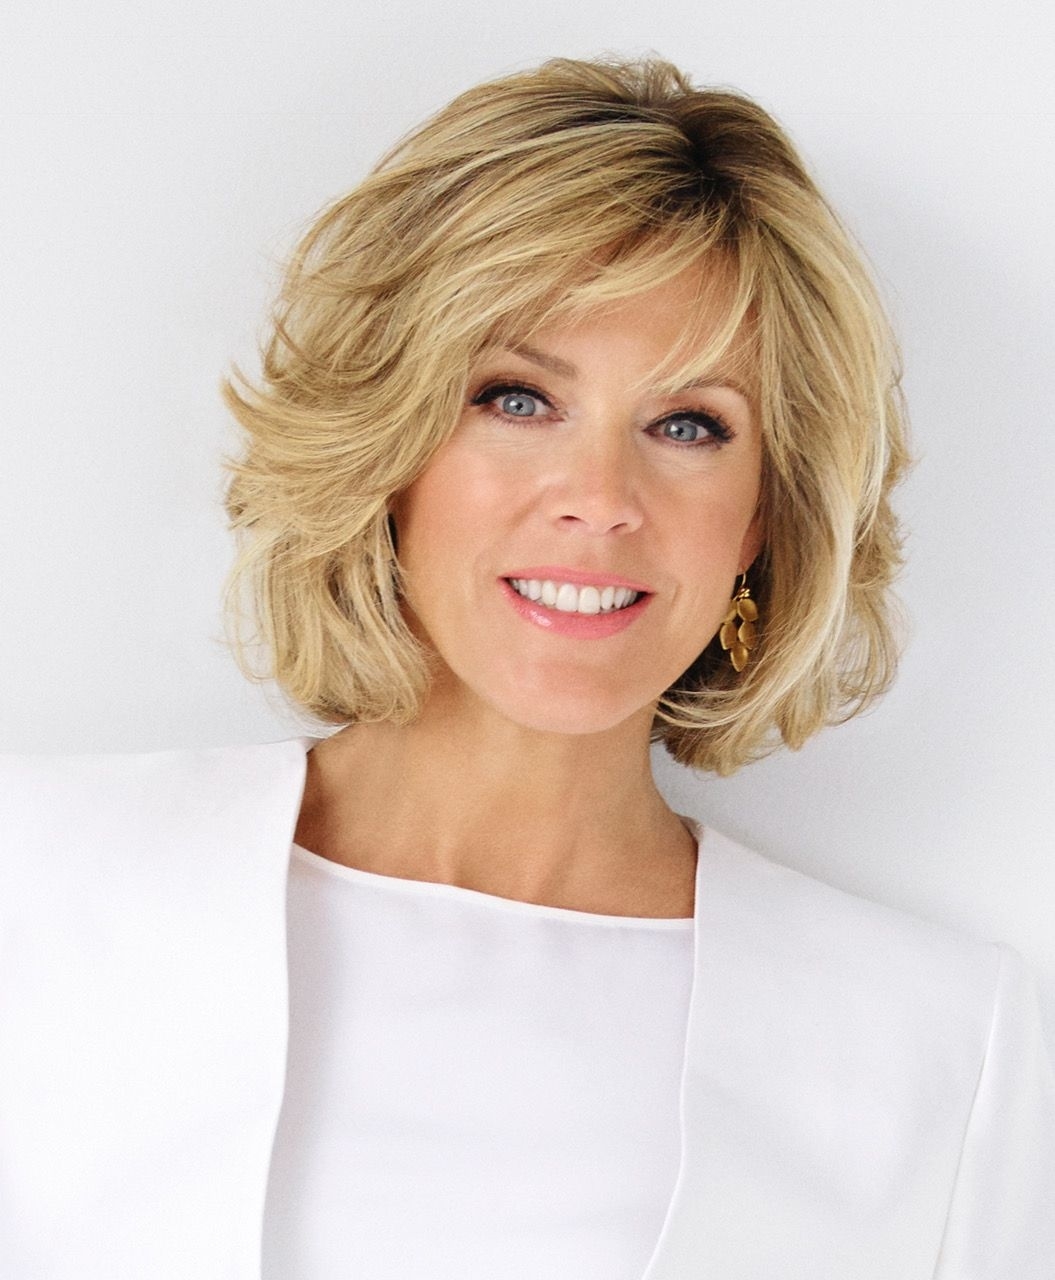 See Related Image Detail | Hair Styles In 2019 | Hair Styles with Deborah Norville Haircut 2019